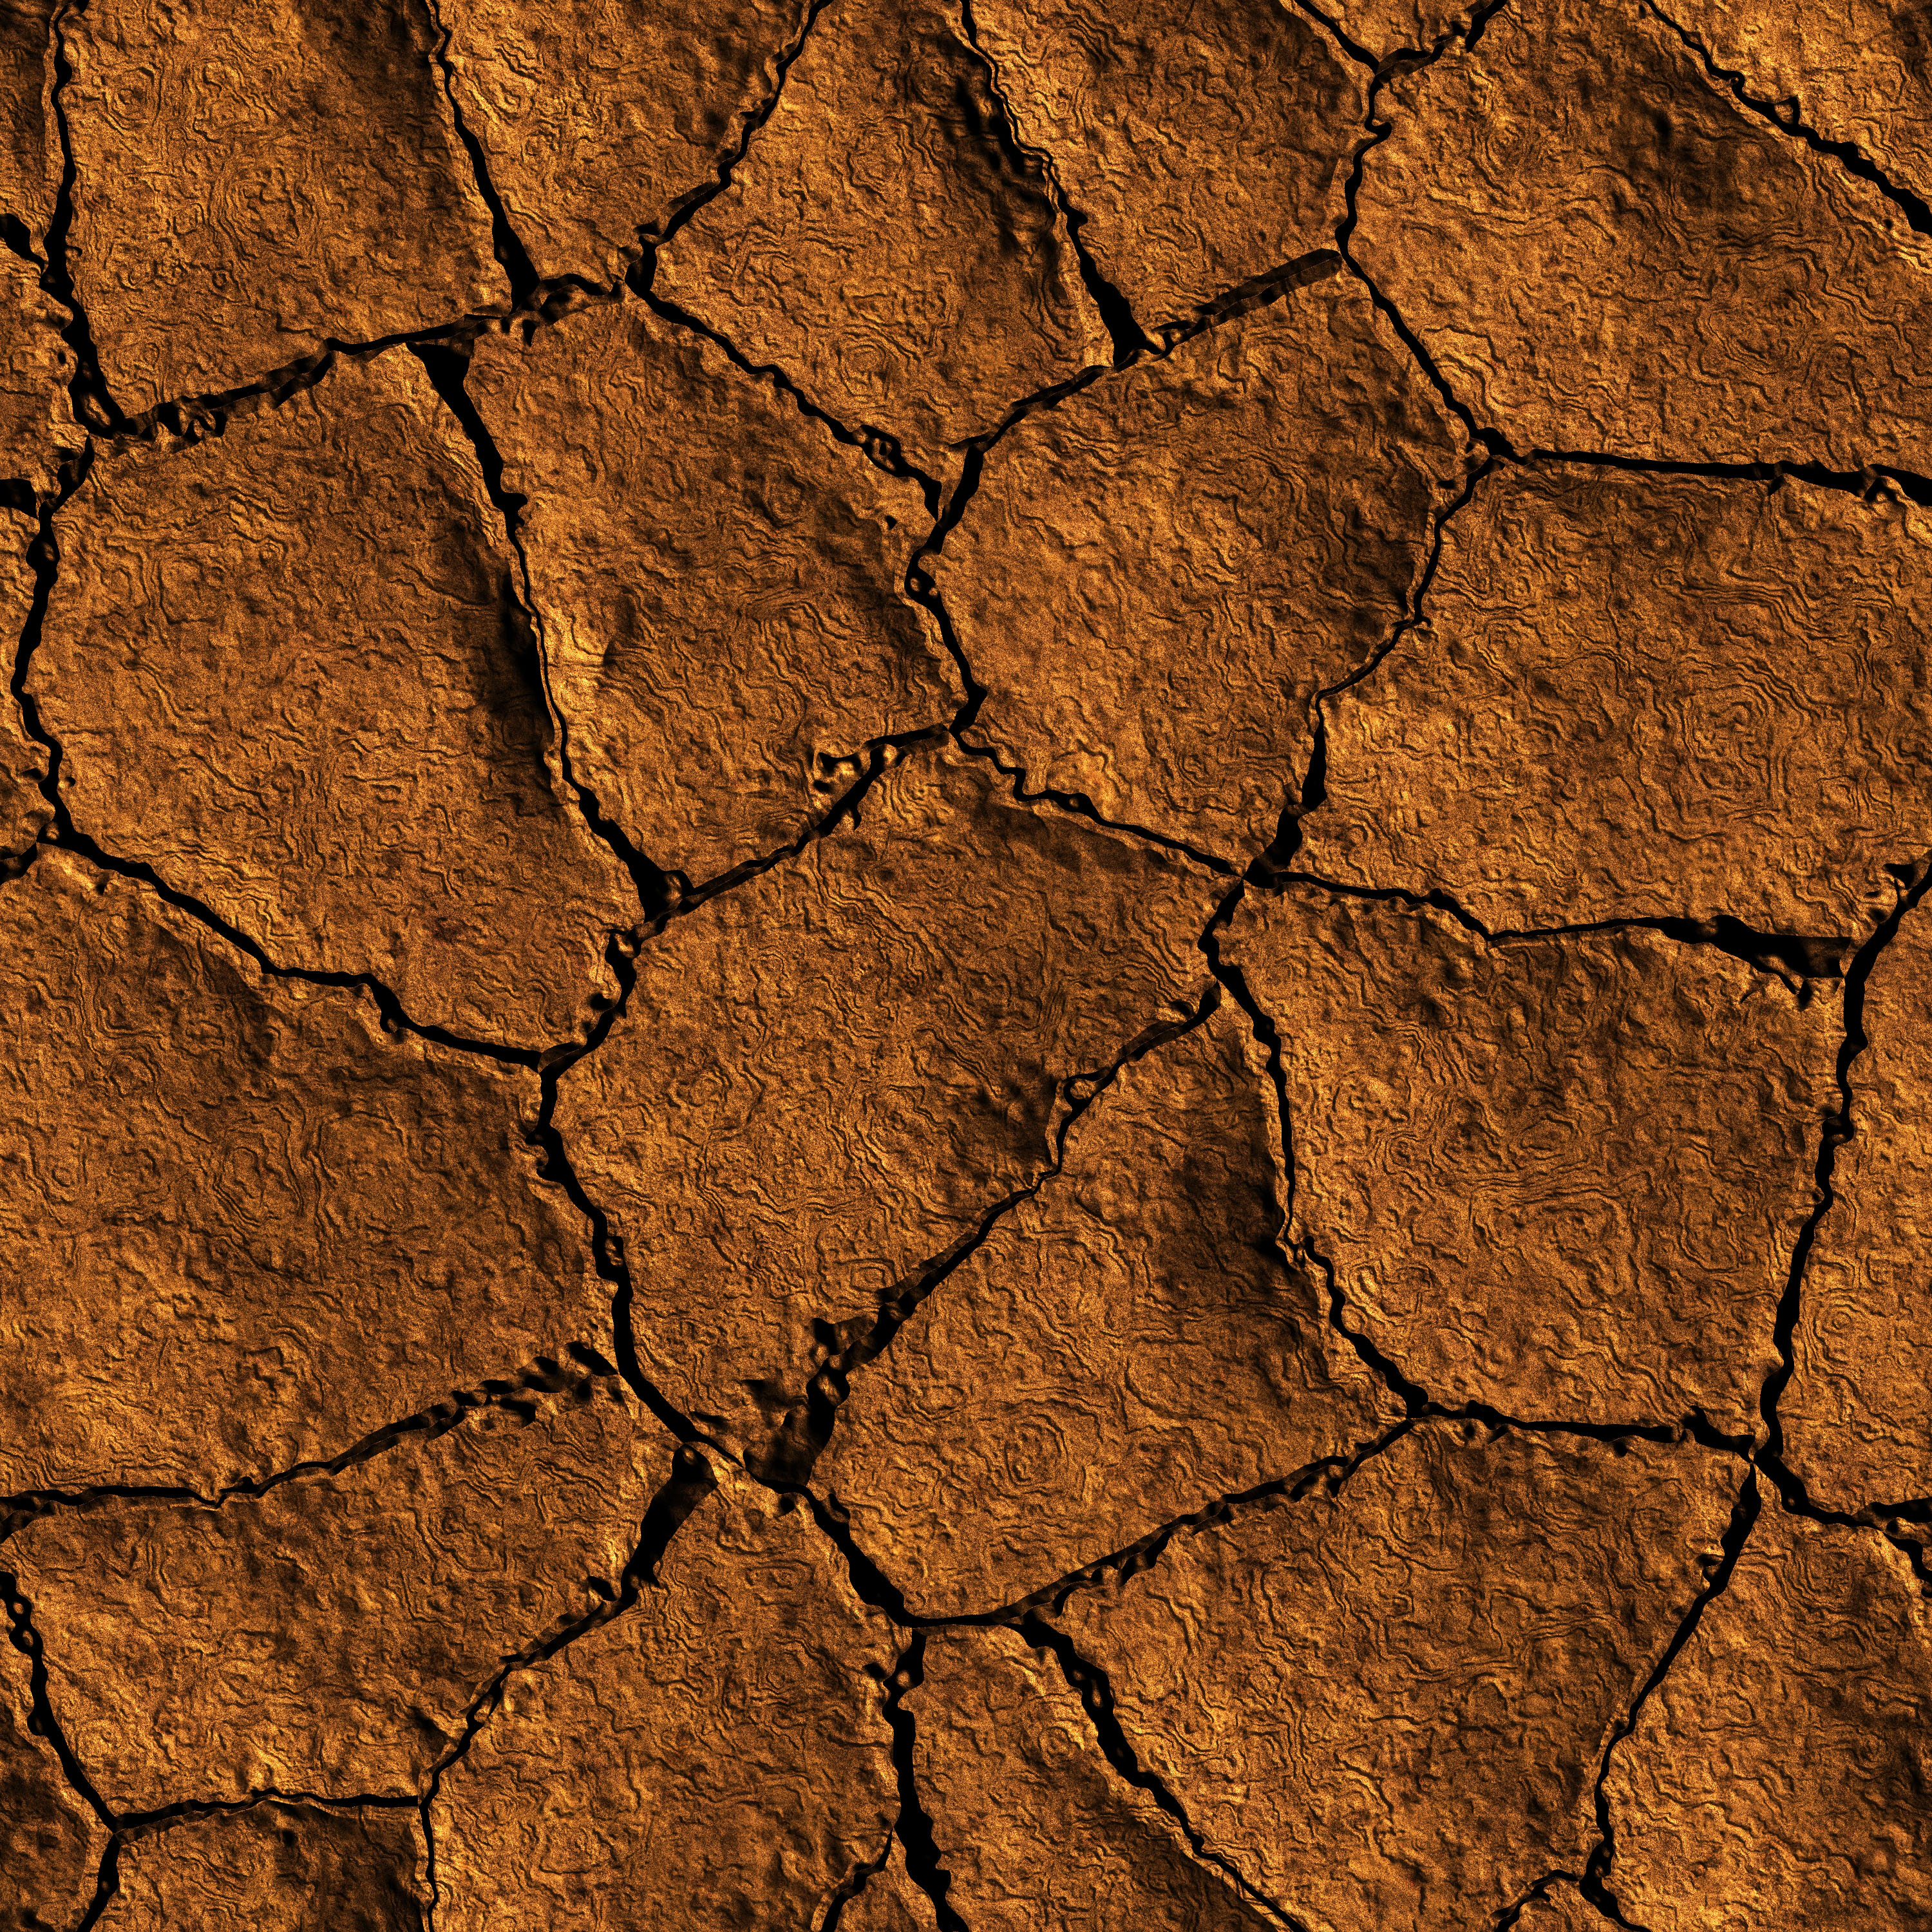 174-16526717-seamless-texture-earth-cracked-because-of-drought.jpg